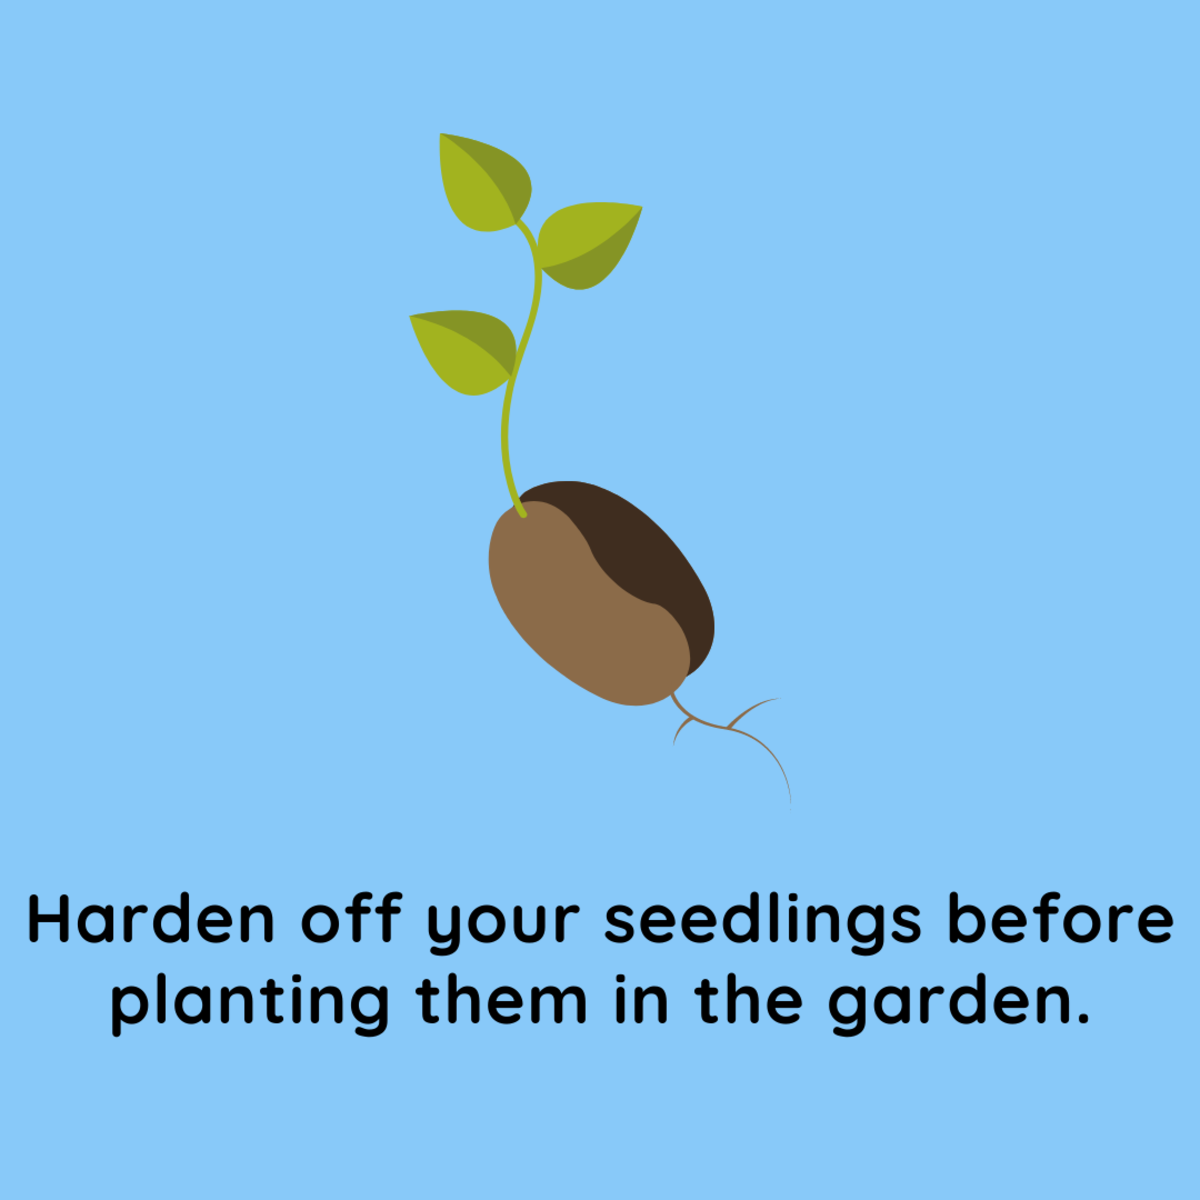 Hardening off your plants before planting them out in your garden is critical.